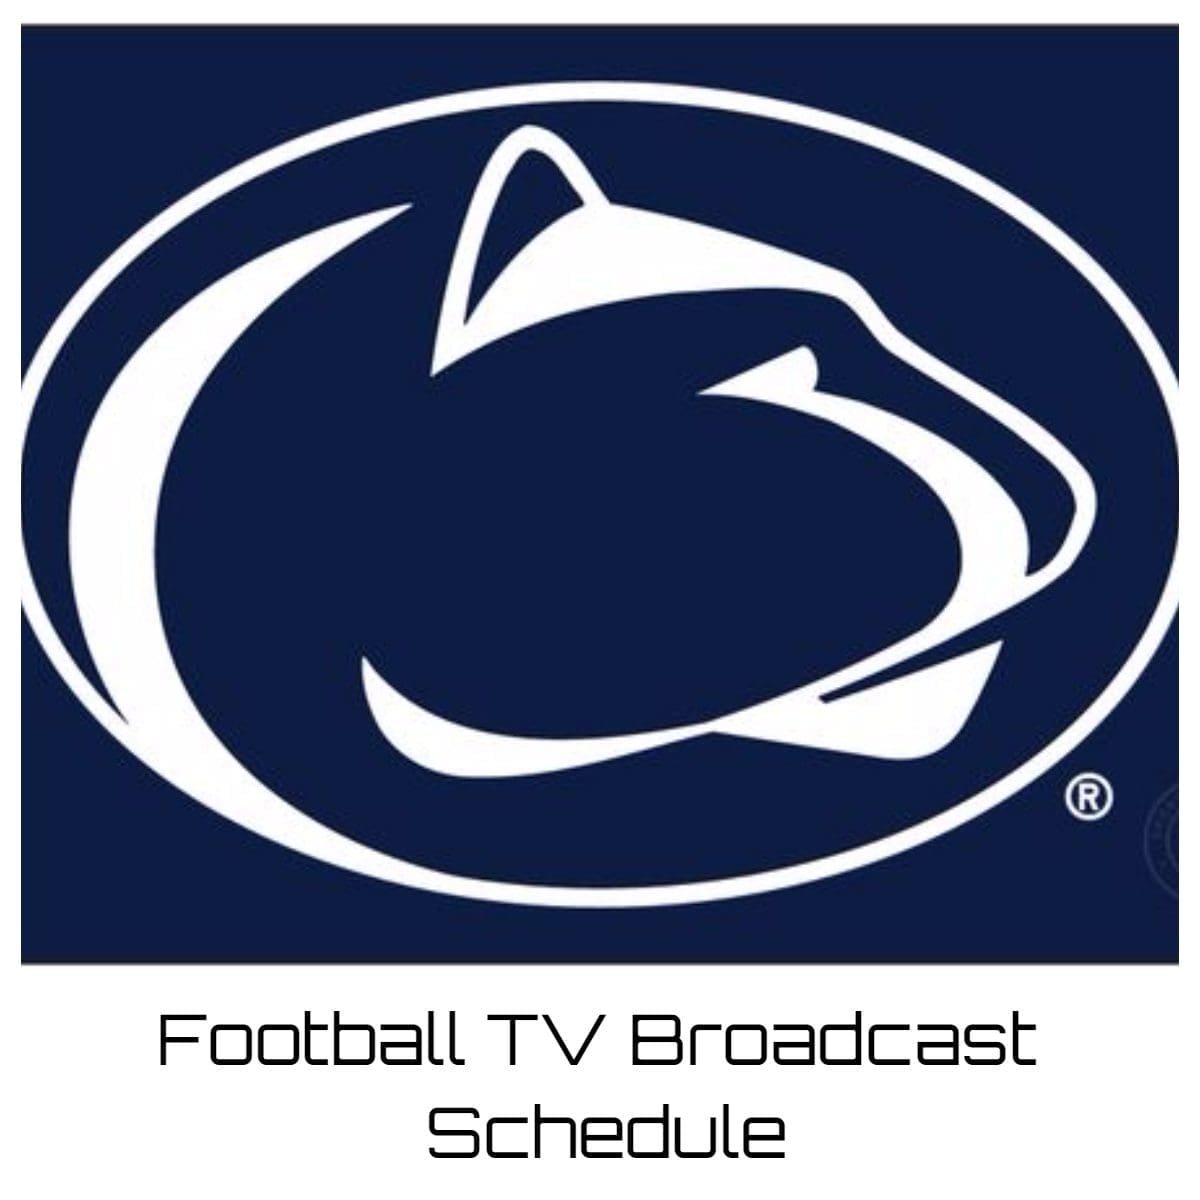 Penn State Nittany Lions Football TV Broadcast Schedule